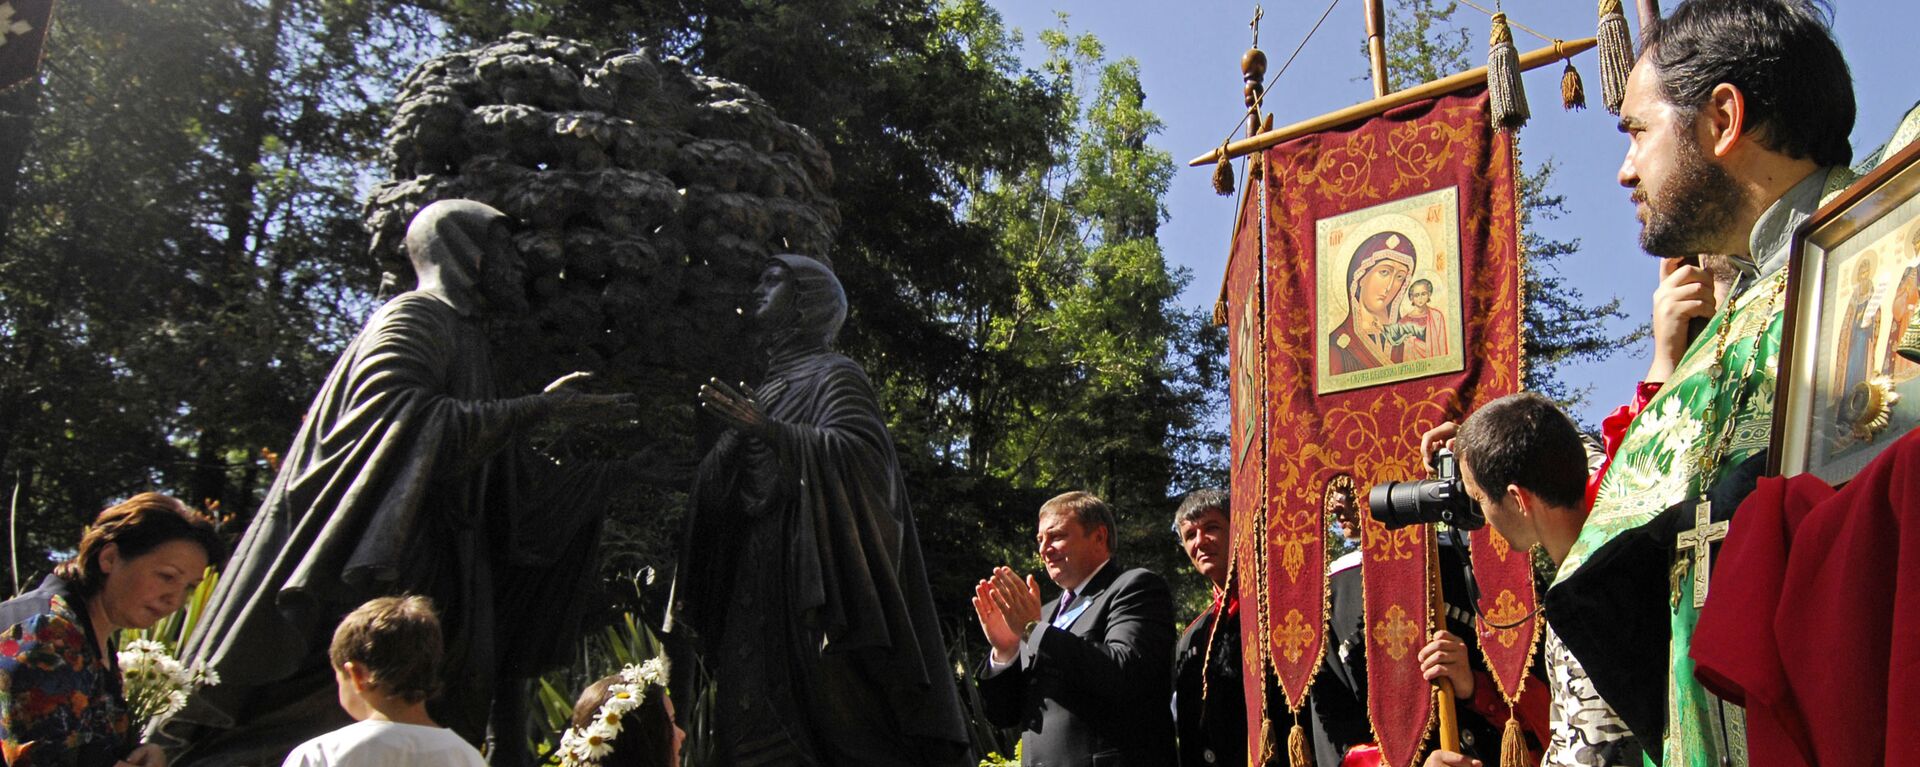 Opening a monument to Pyotr and Fevronia in Sochi - Sputnik International, 1920, 08.07.2009